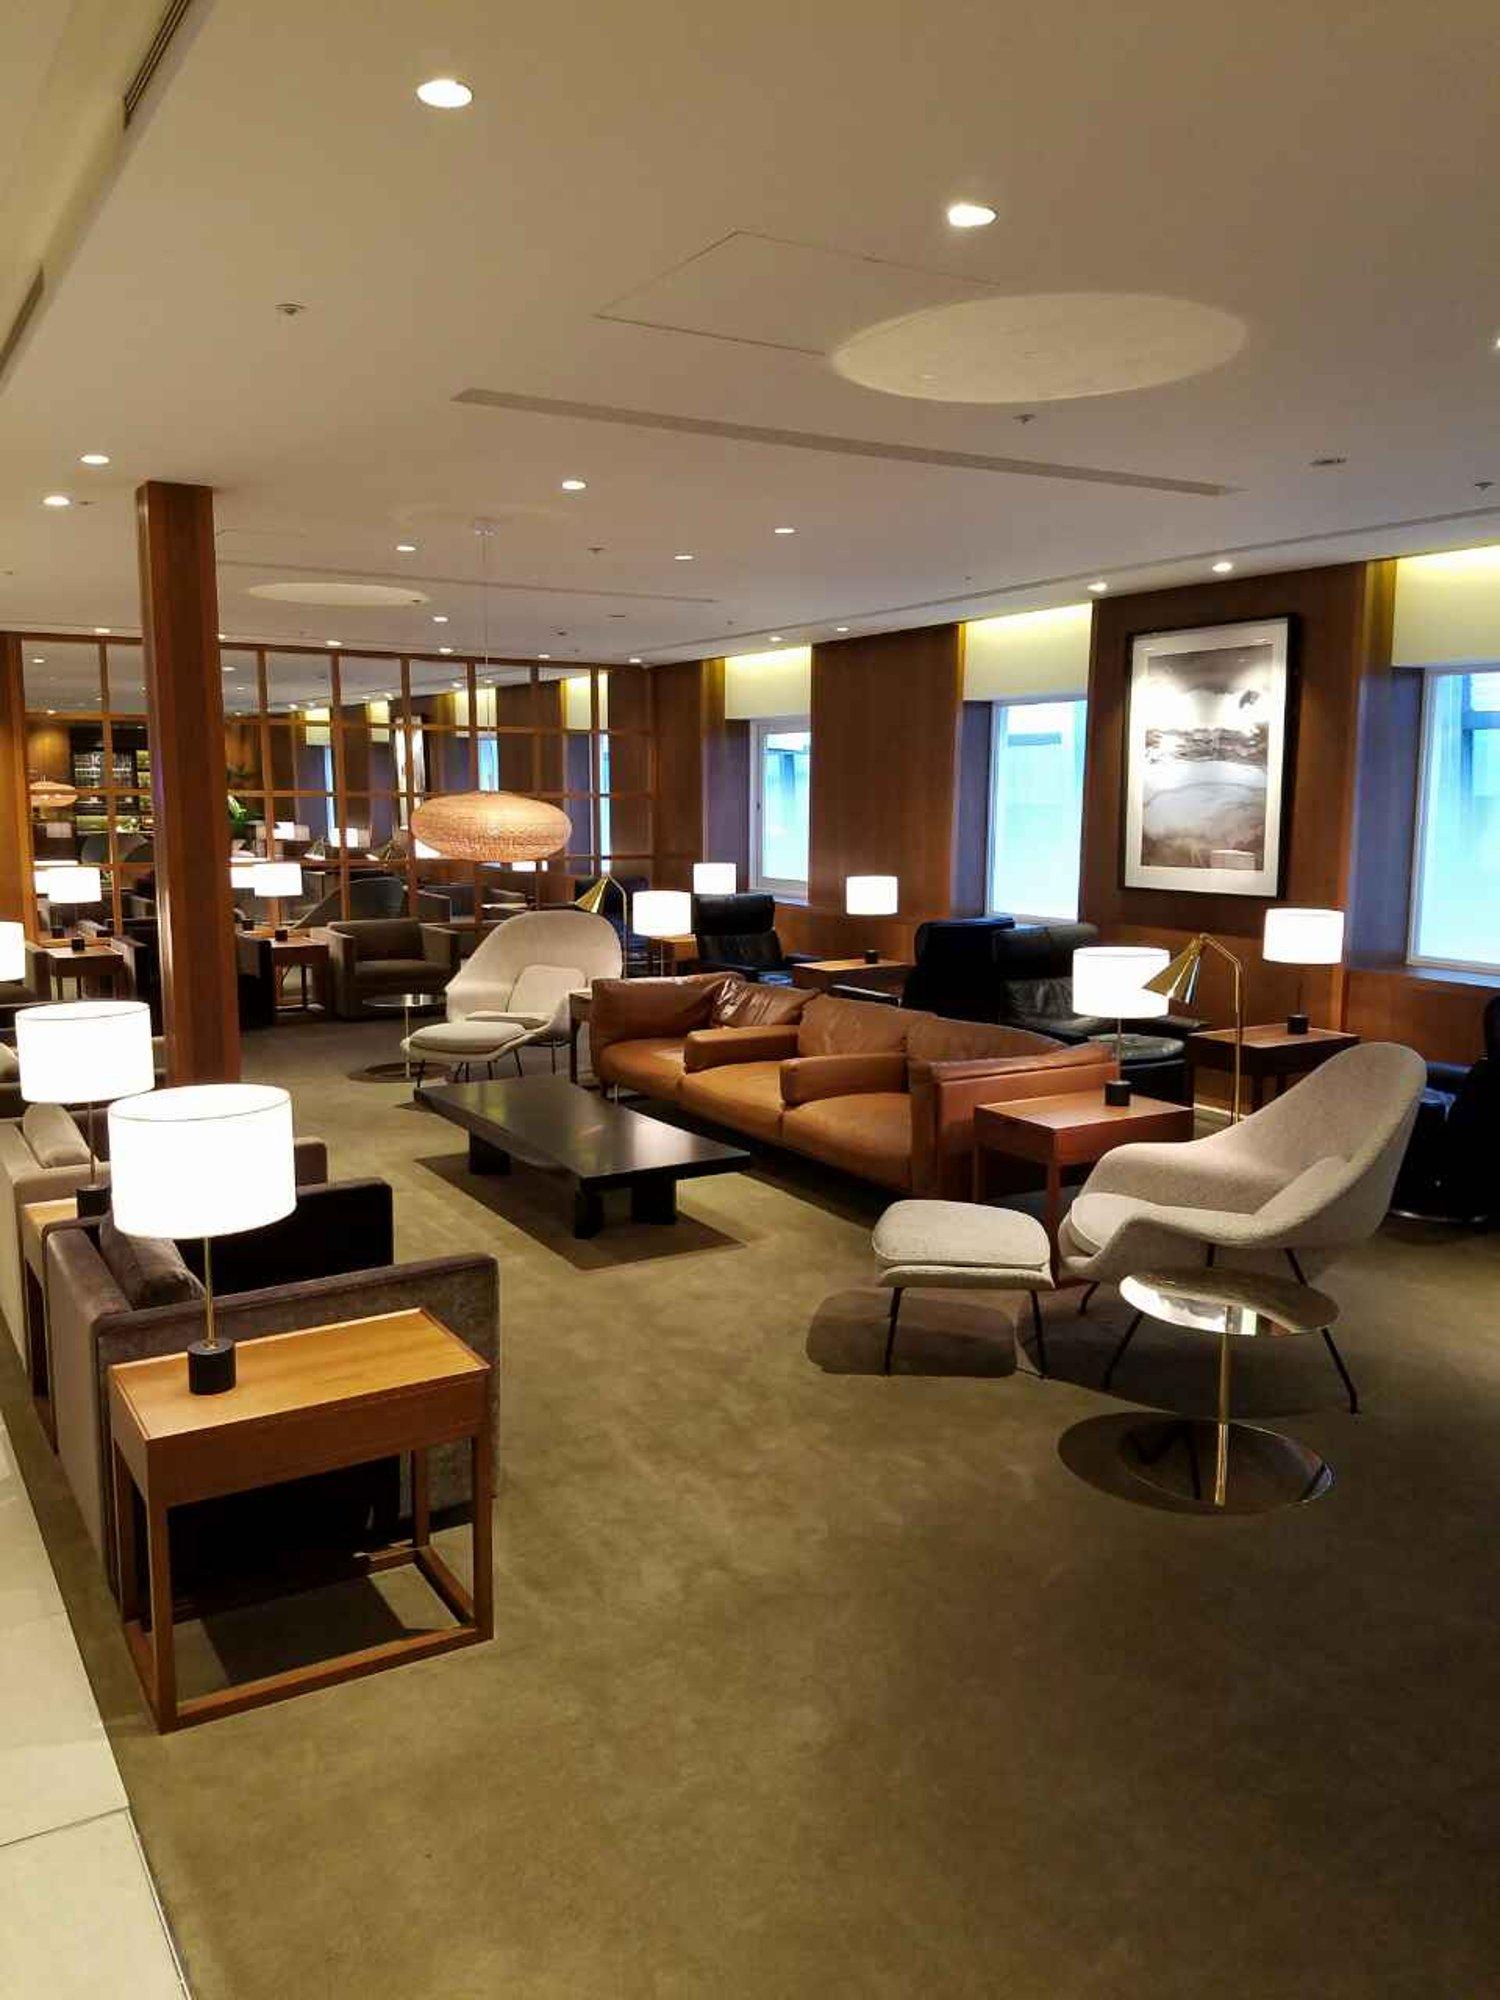 Cathay Pacific Lounge image 33 of 37